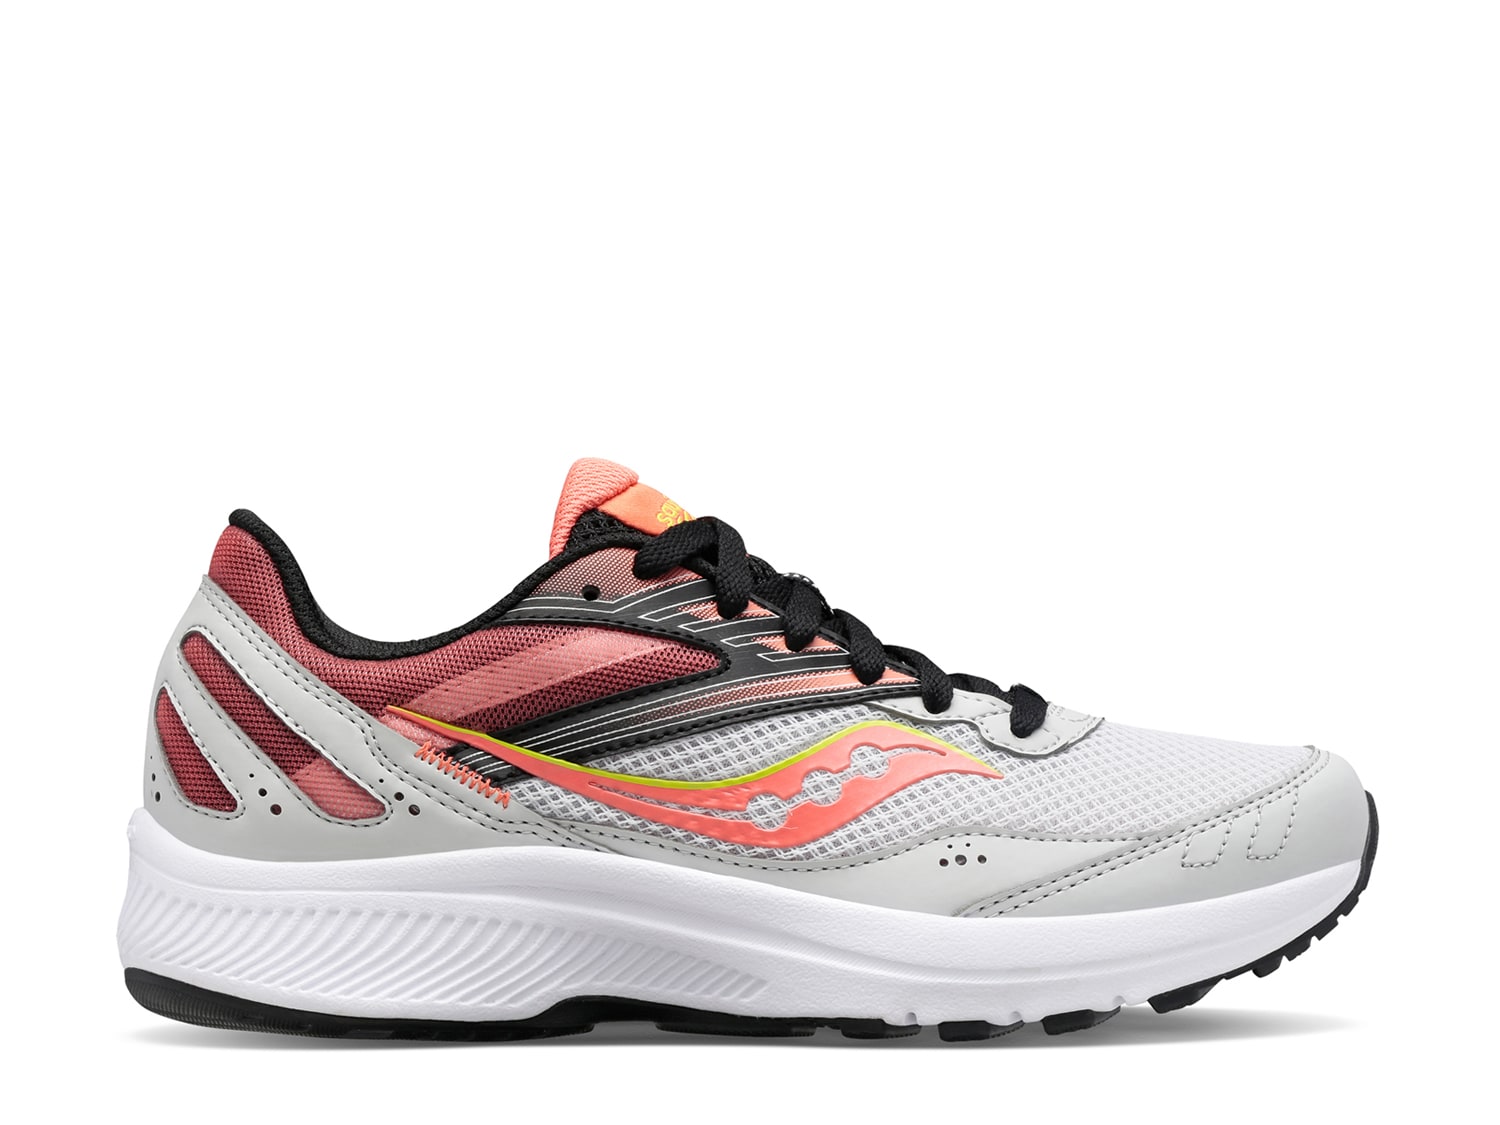 Saucony Cohesion 15 Running Shoe - Women's - Free Shipping | DSW